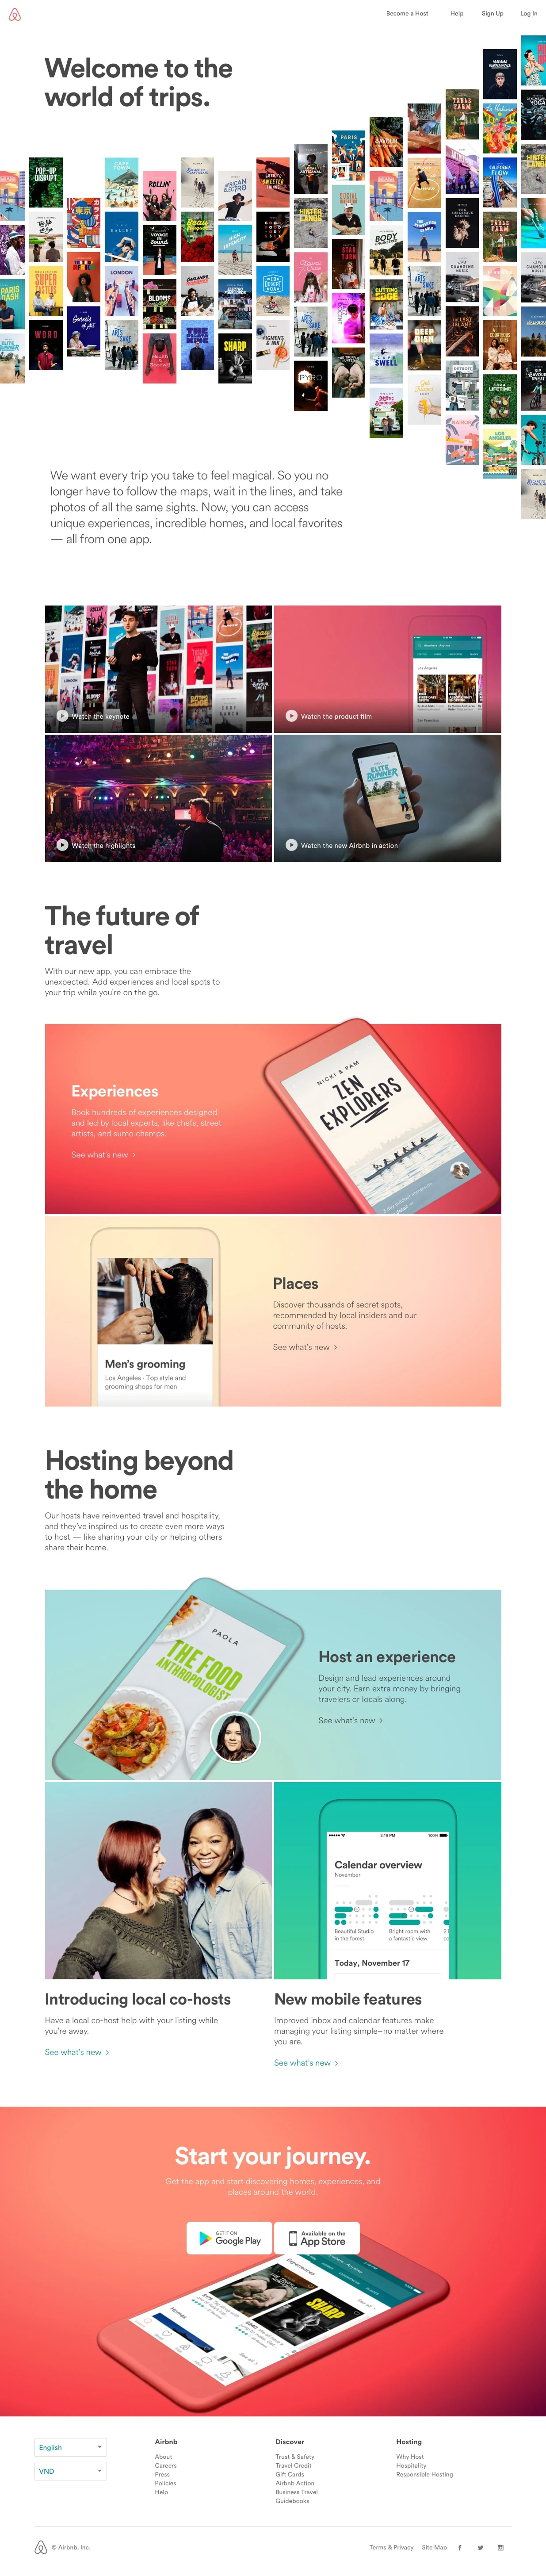 Airbnb Landing Page Example: With our new app, you can embrace the unexpected. Add experiences and local spots to your trip while you’re on the go.